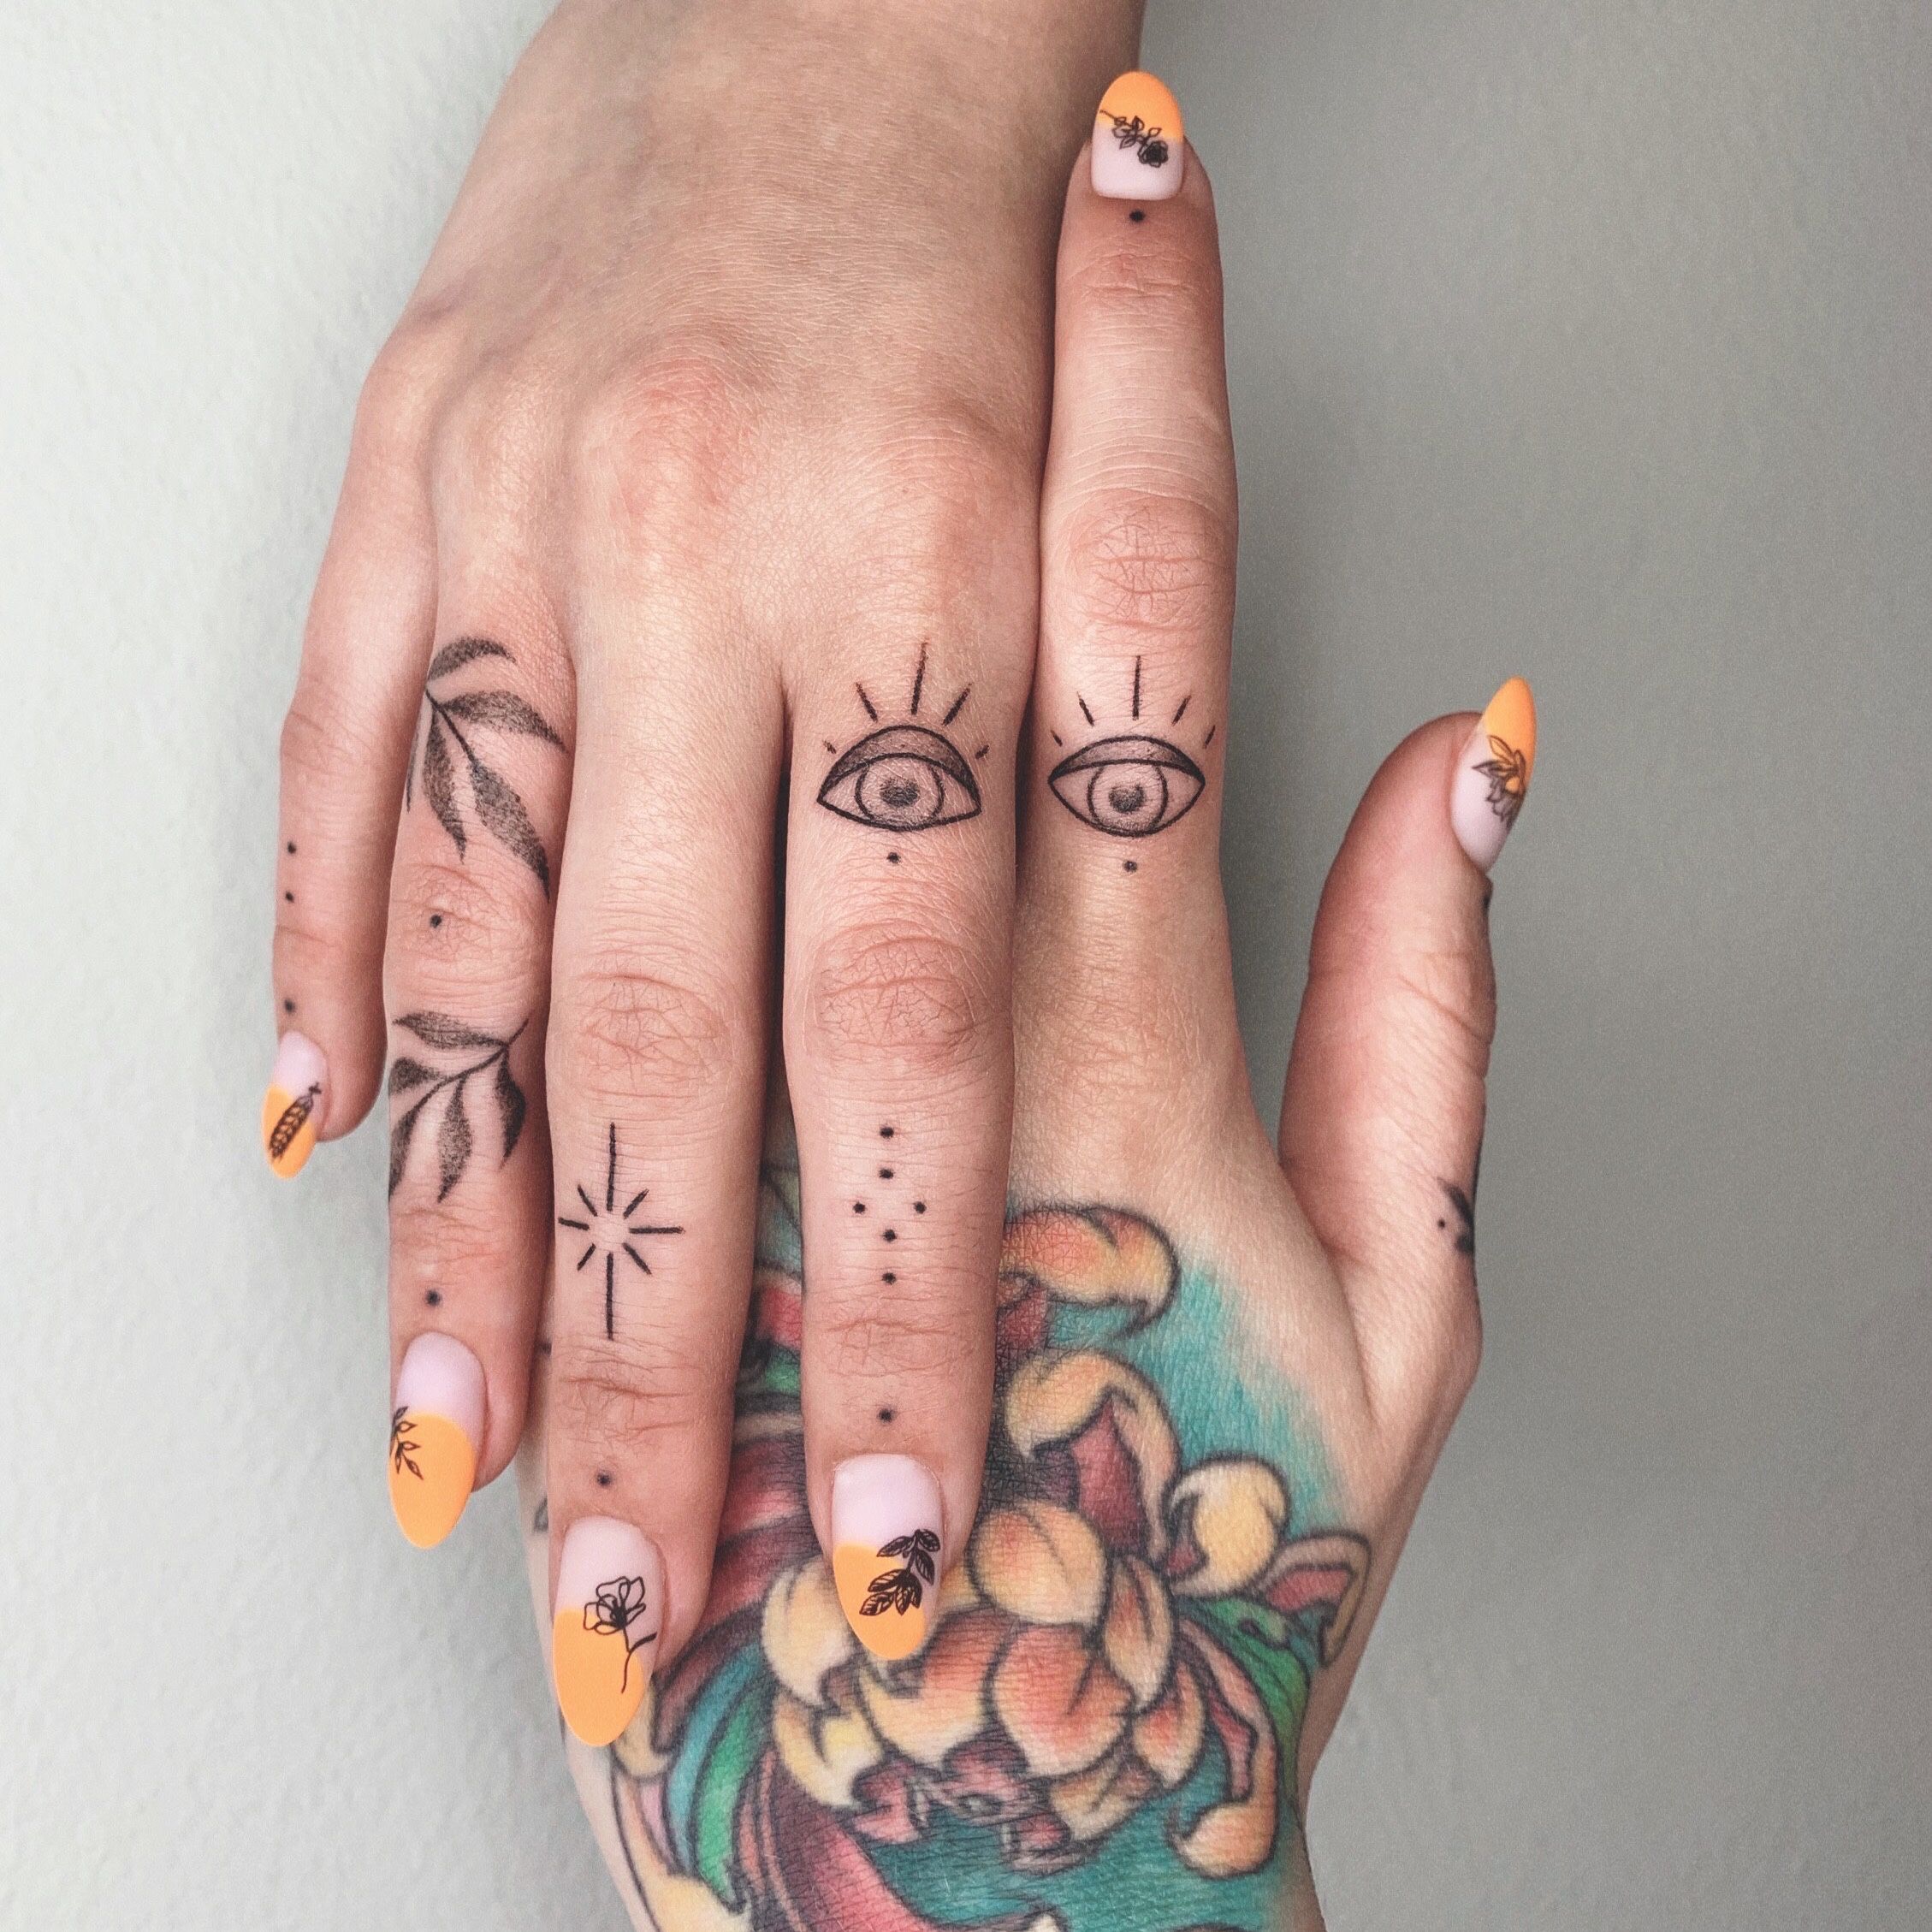 55 Unique Small Finger Tattoo Ideas | Hand and finger tattoos, Small finger  tattoos, Toe tattoos